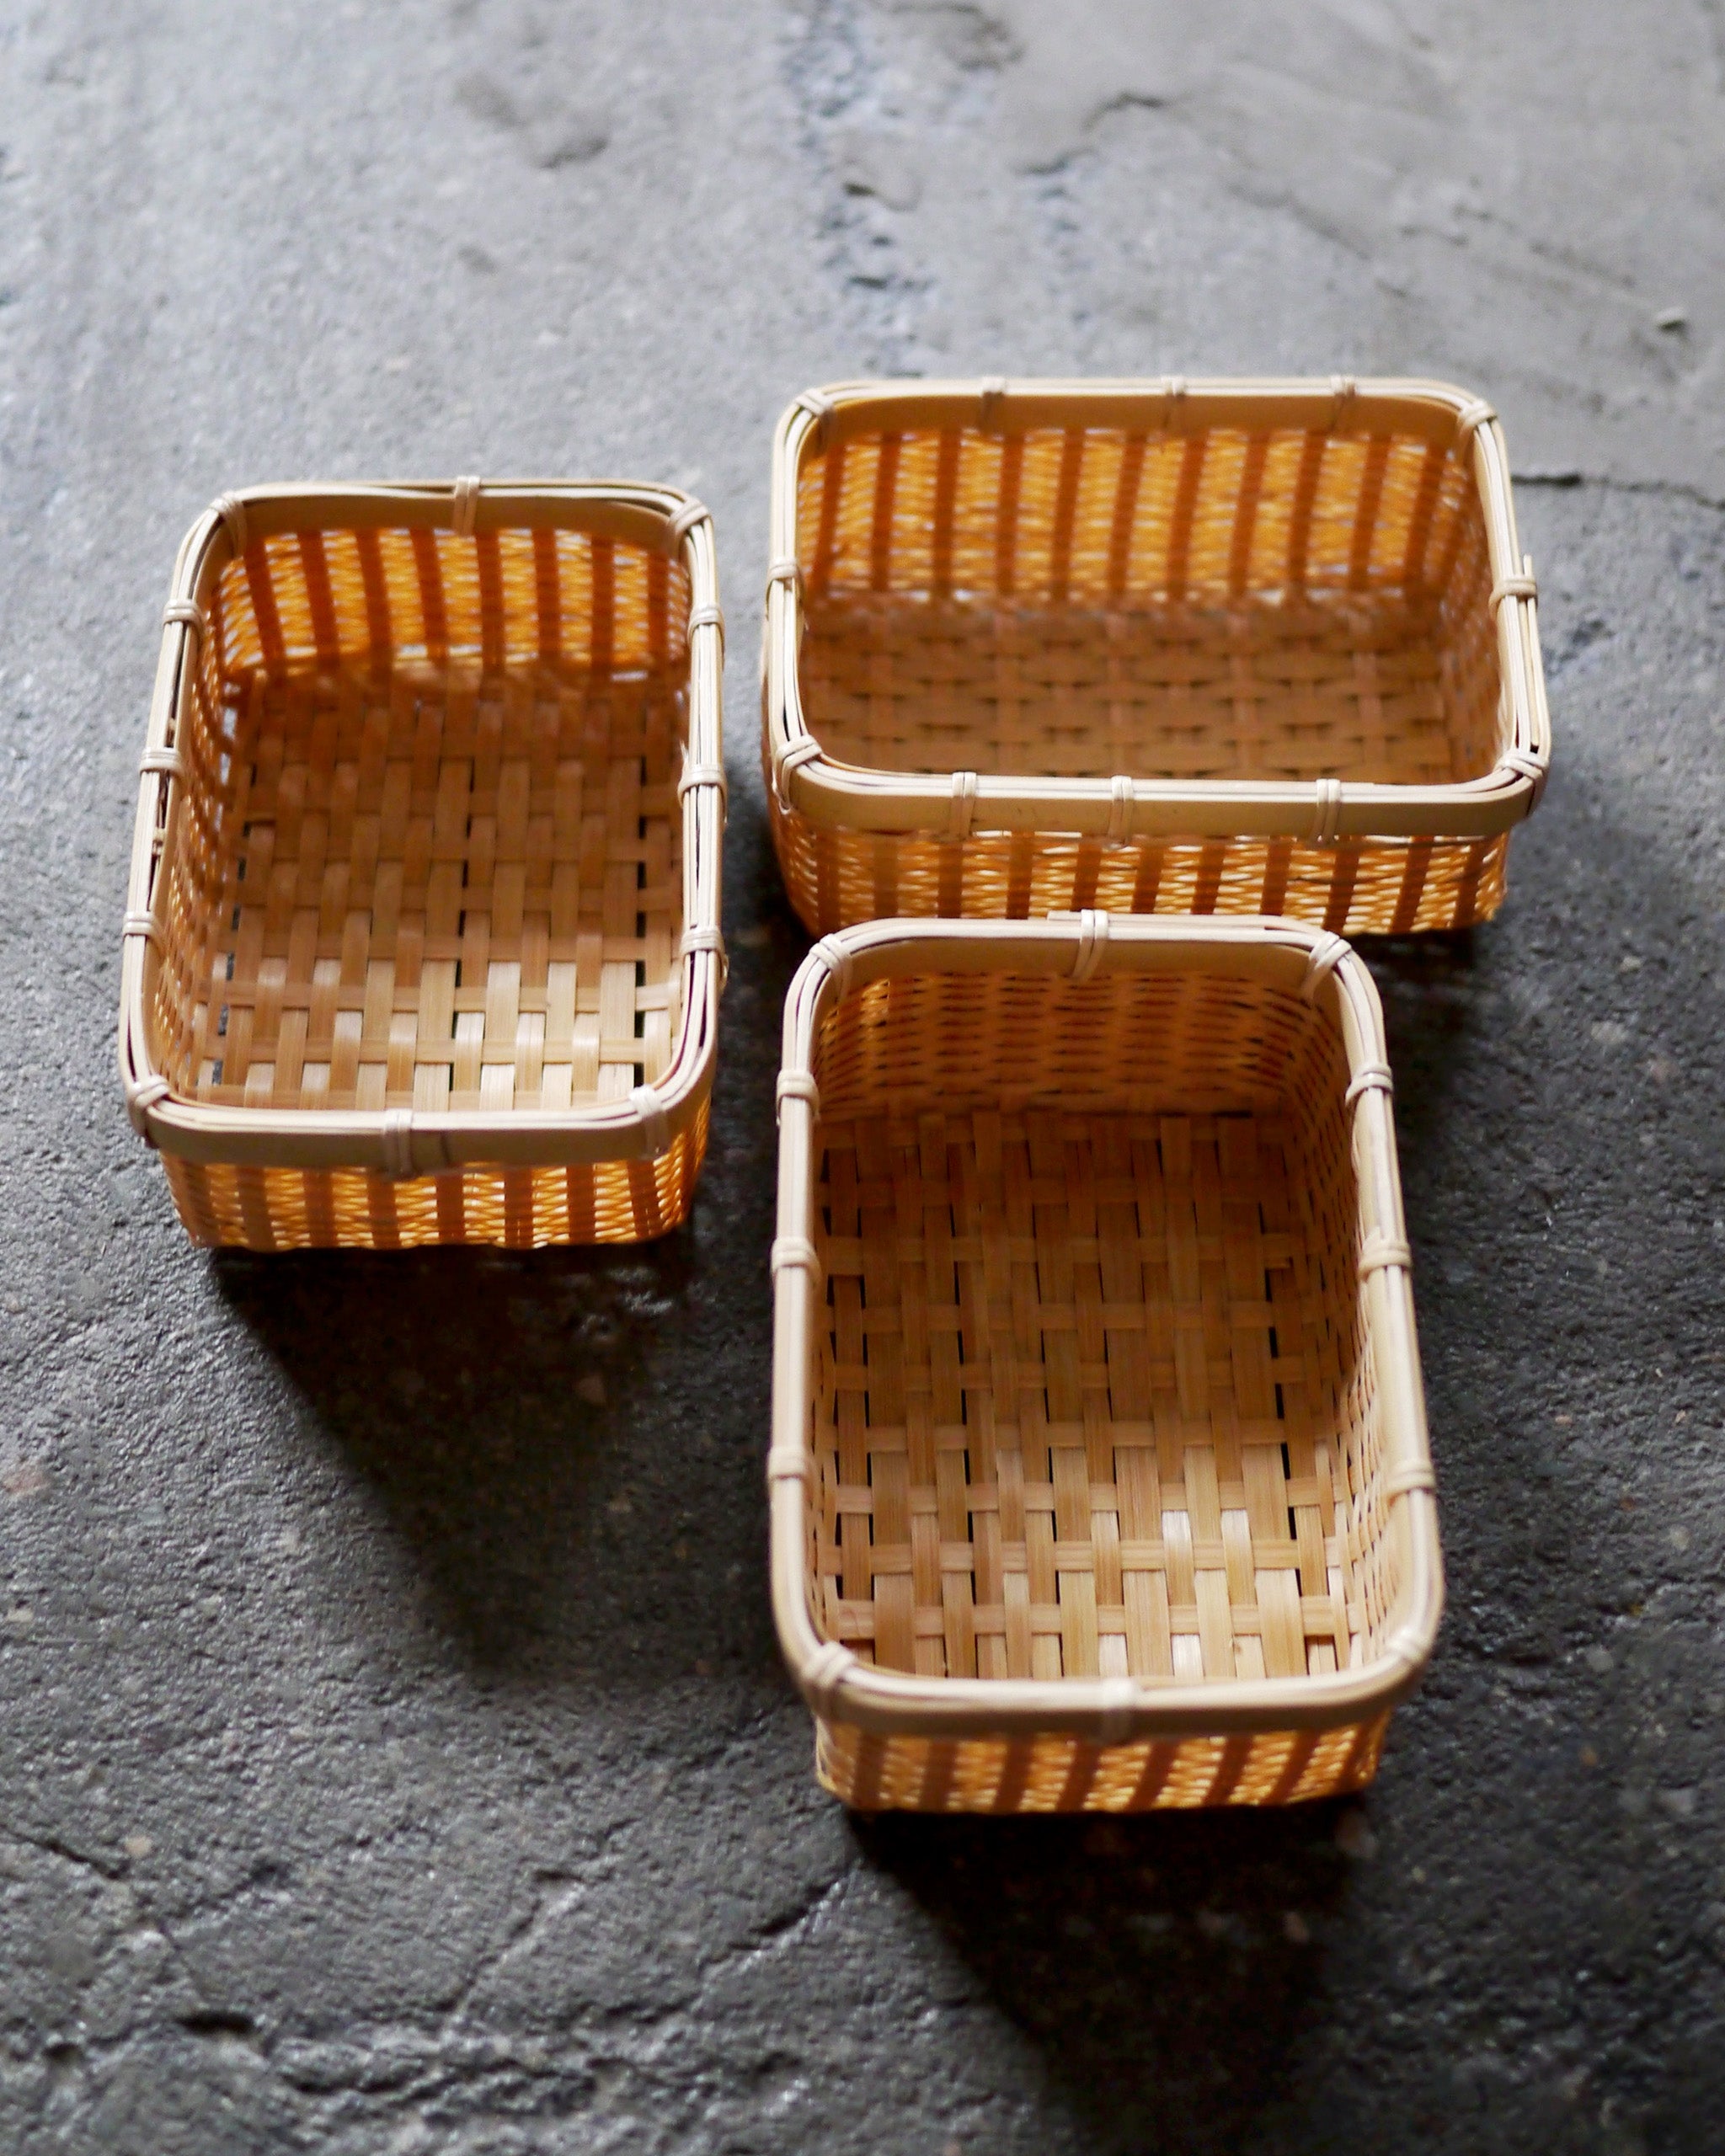 Angled in situation image of three small woven rectangular baskets by Kochosai Kosuga on dark cement surface.